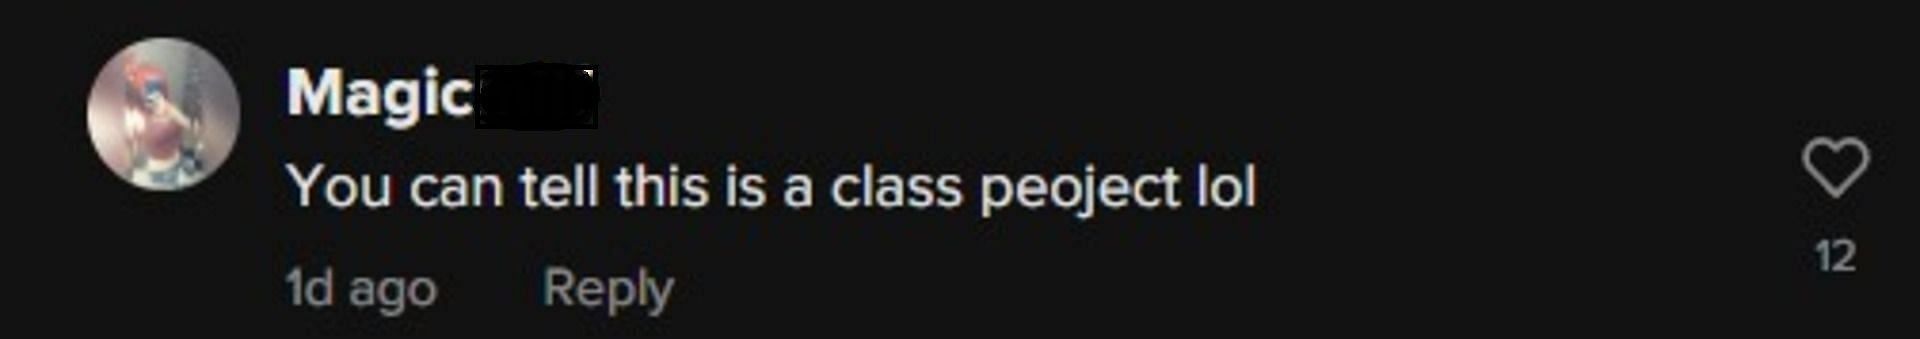 A comment on the video claims that the duo is creating videos for a &quot;class project.&quot; (Image via TikTok)